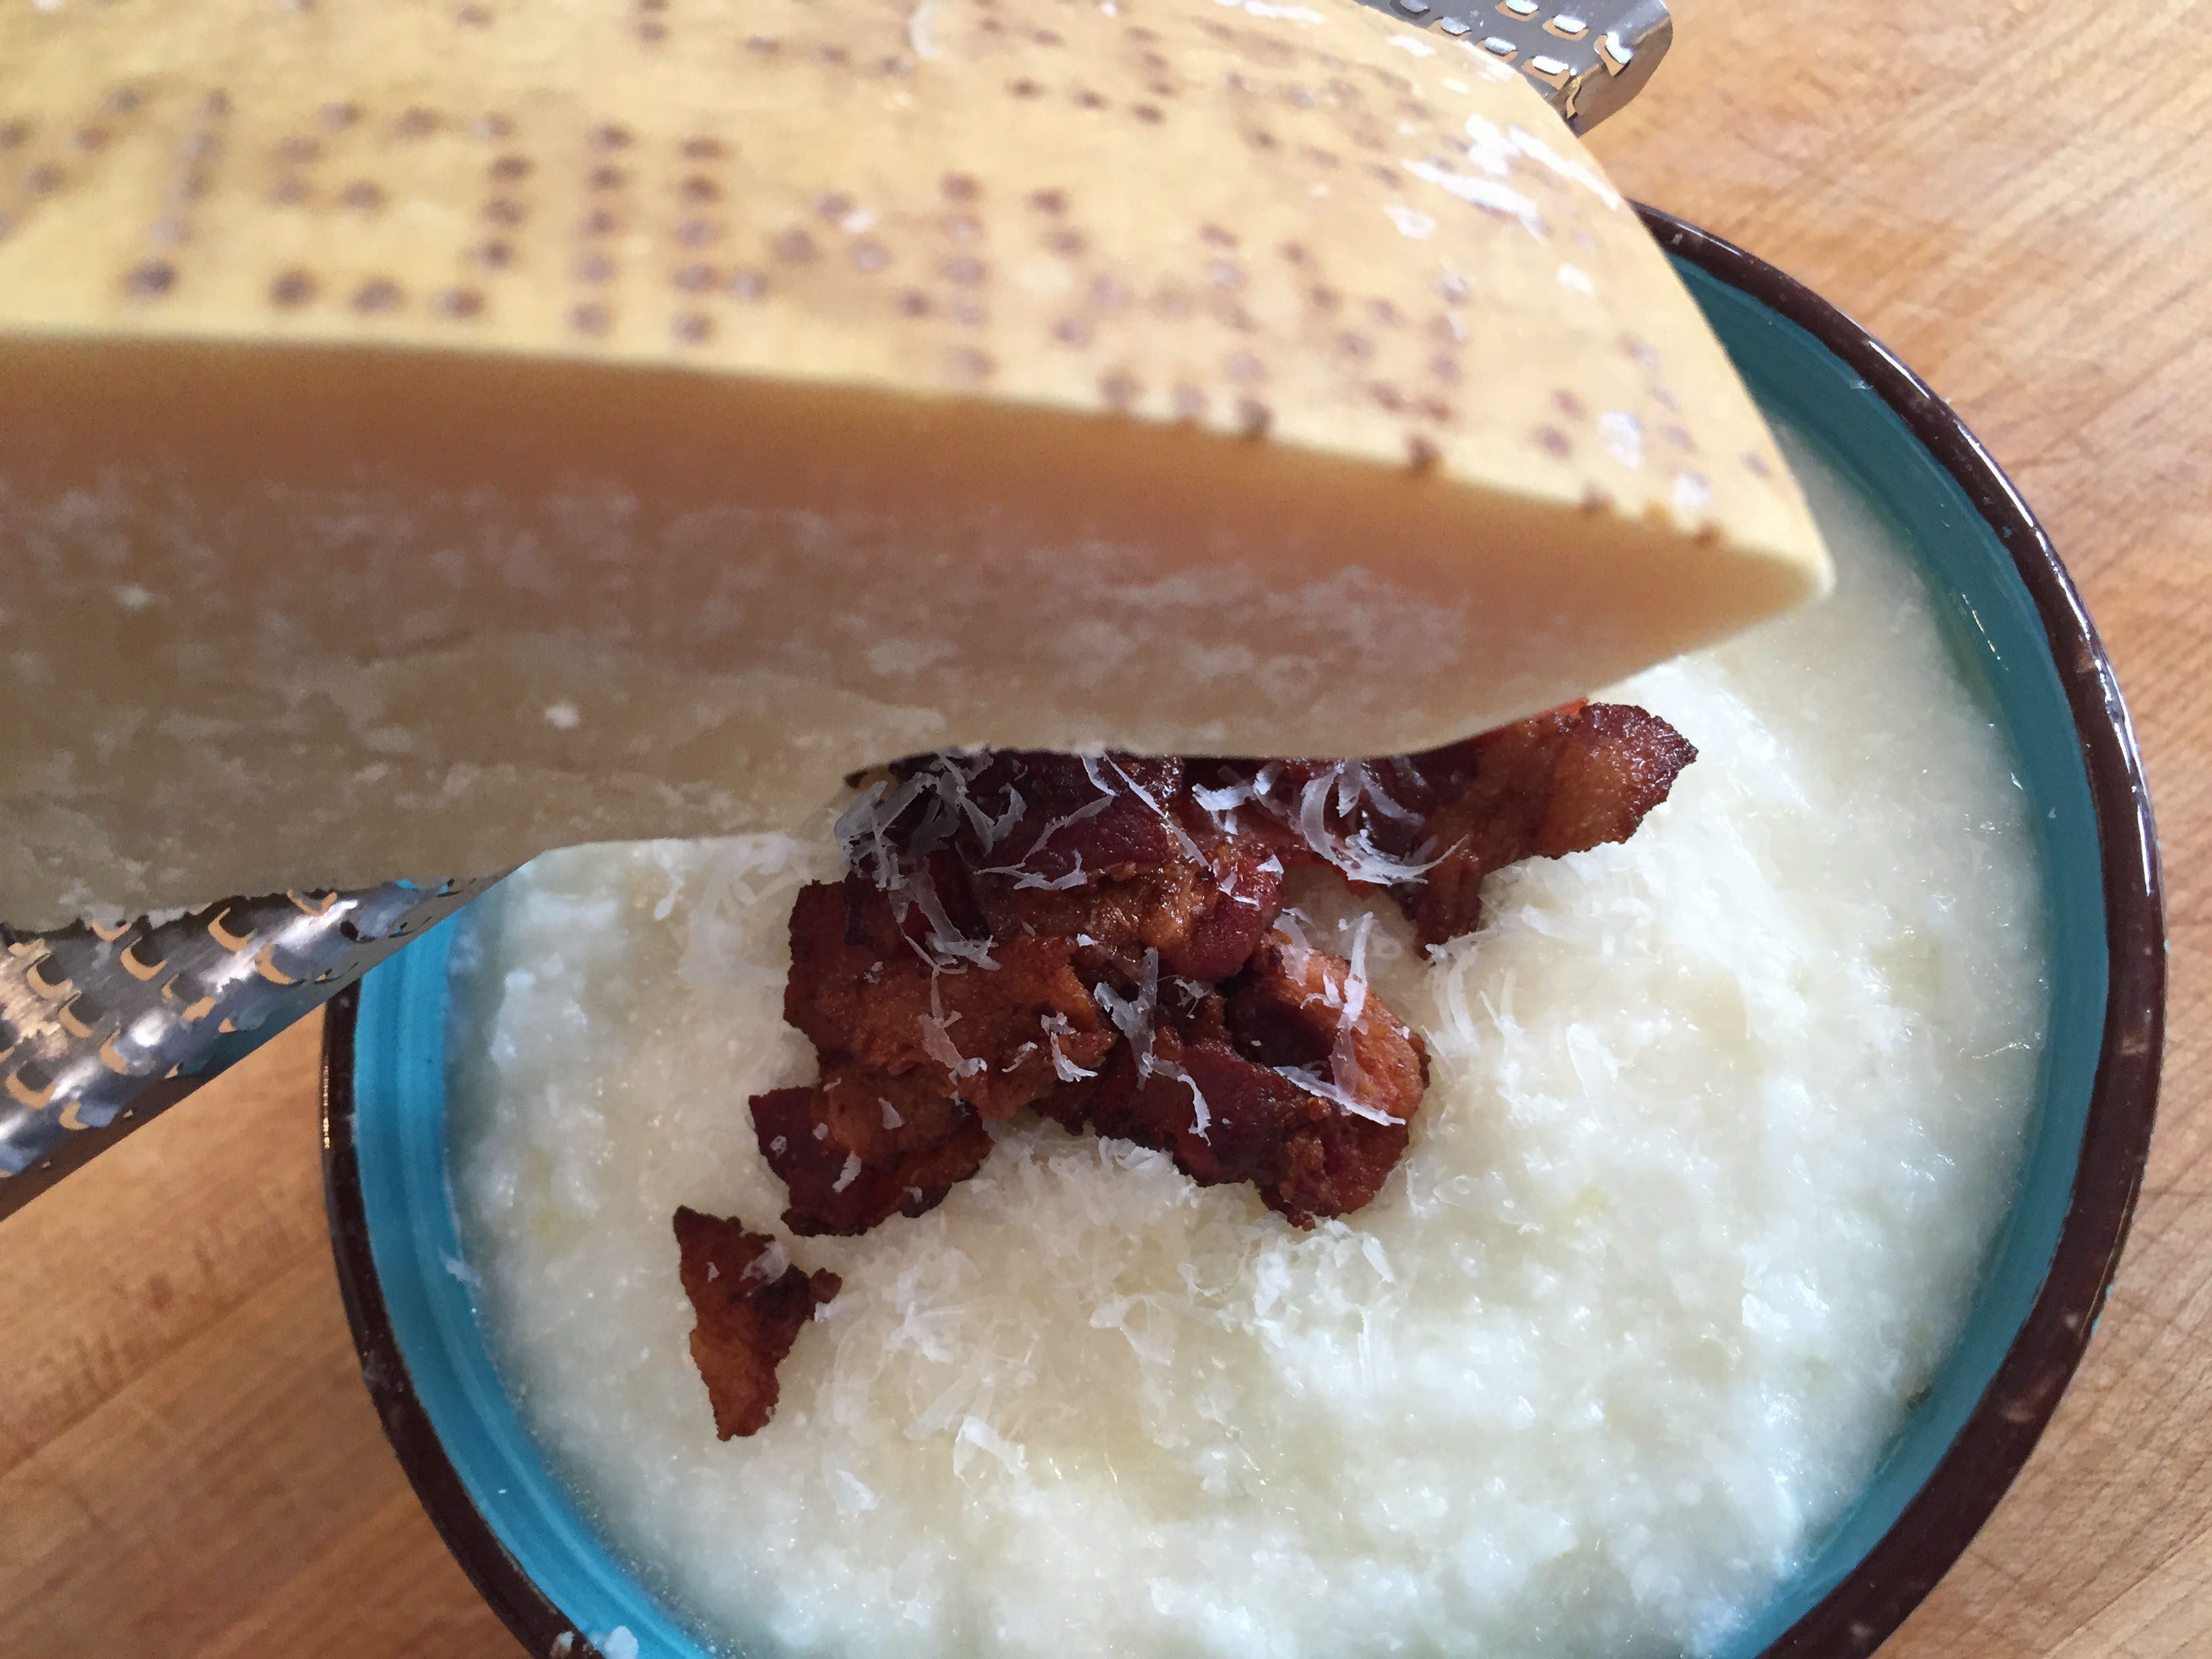 Hominy grits with fresh mozzarella, parmesan and bacon